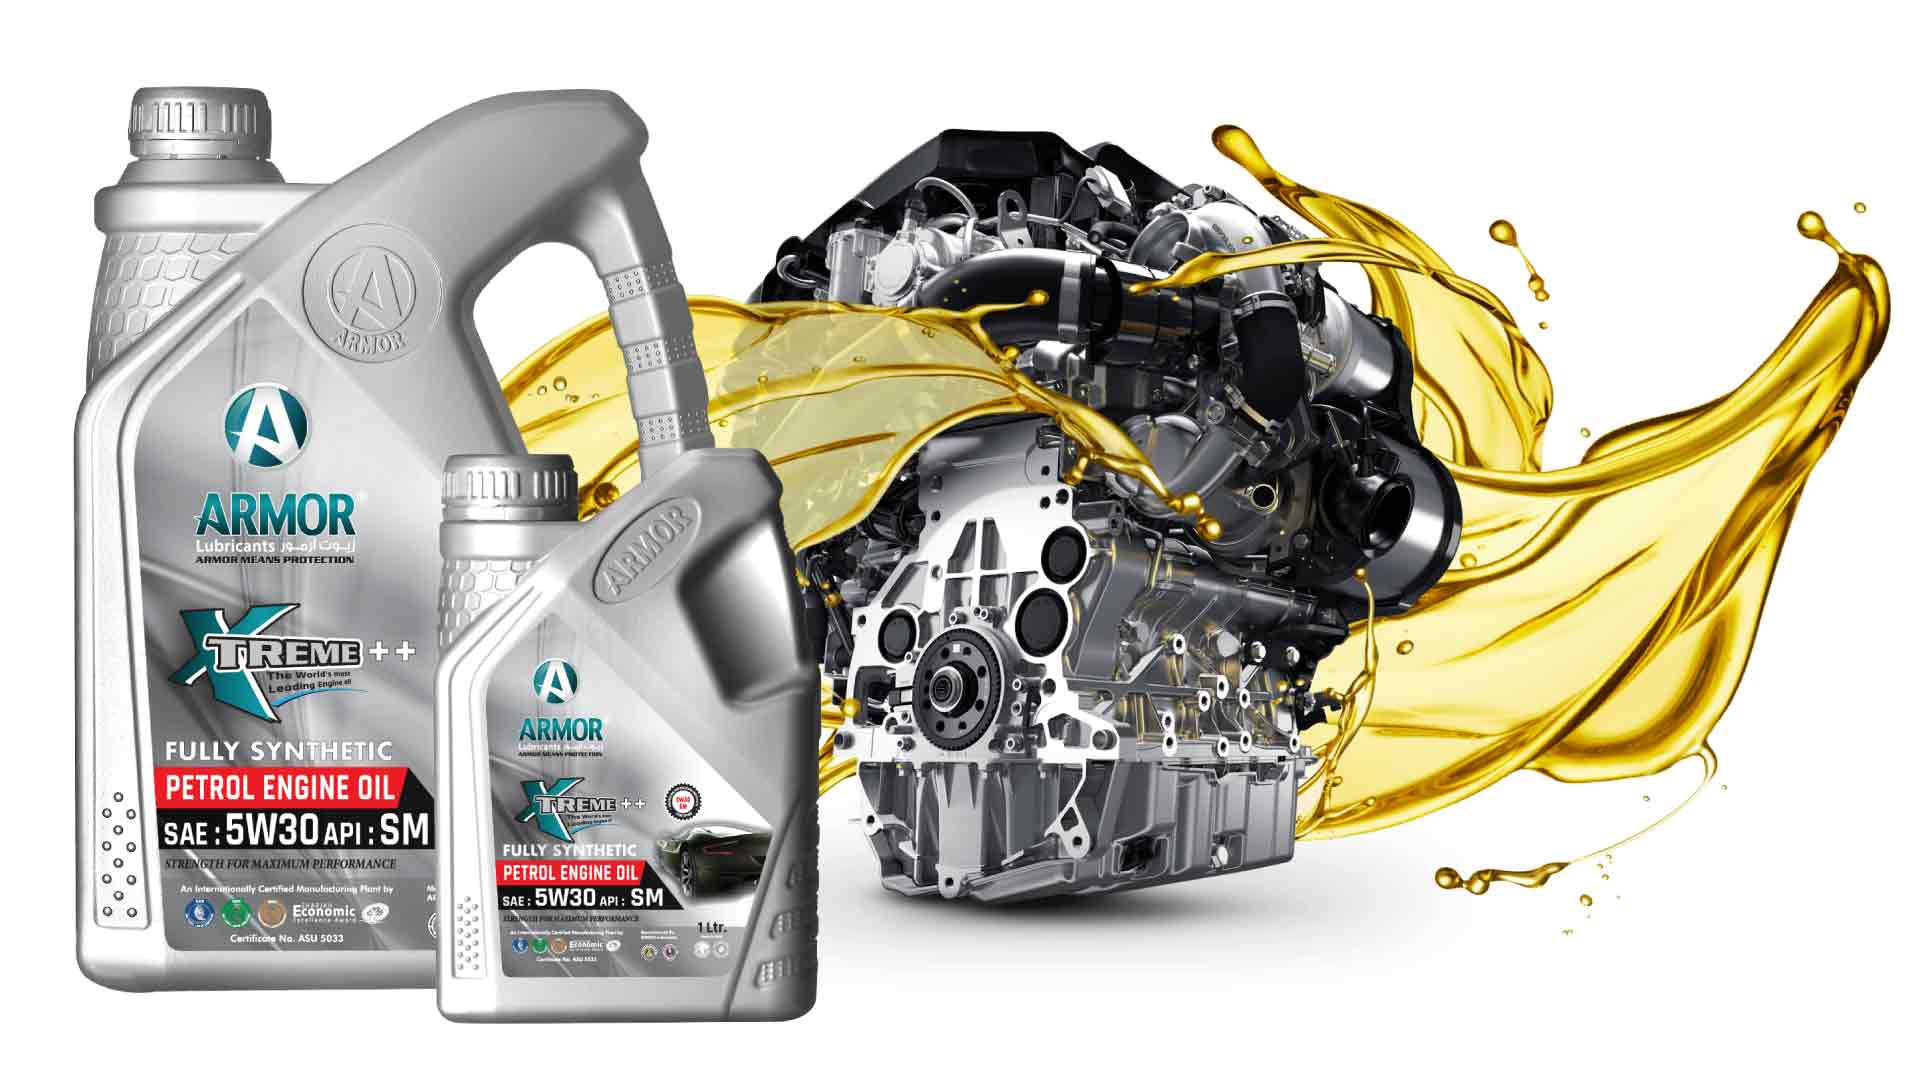 Armor 5w30 Engine Oil for High Performance